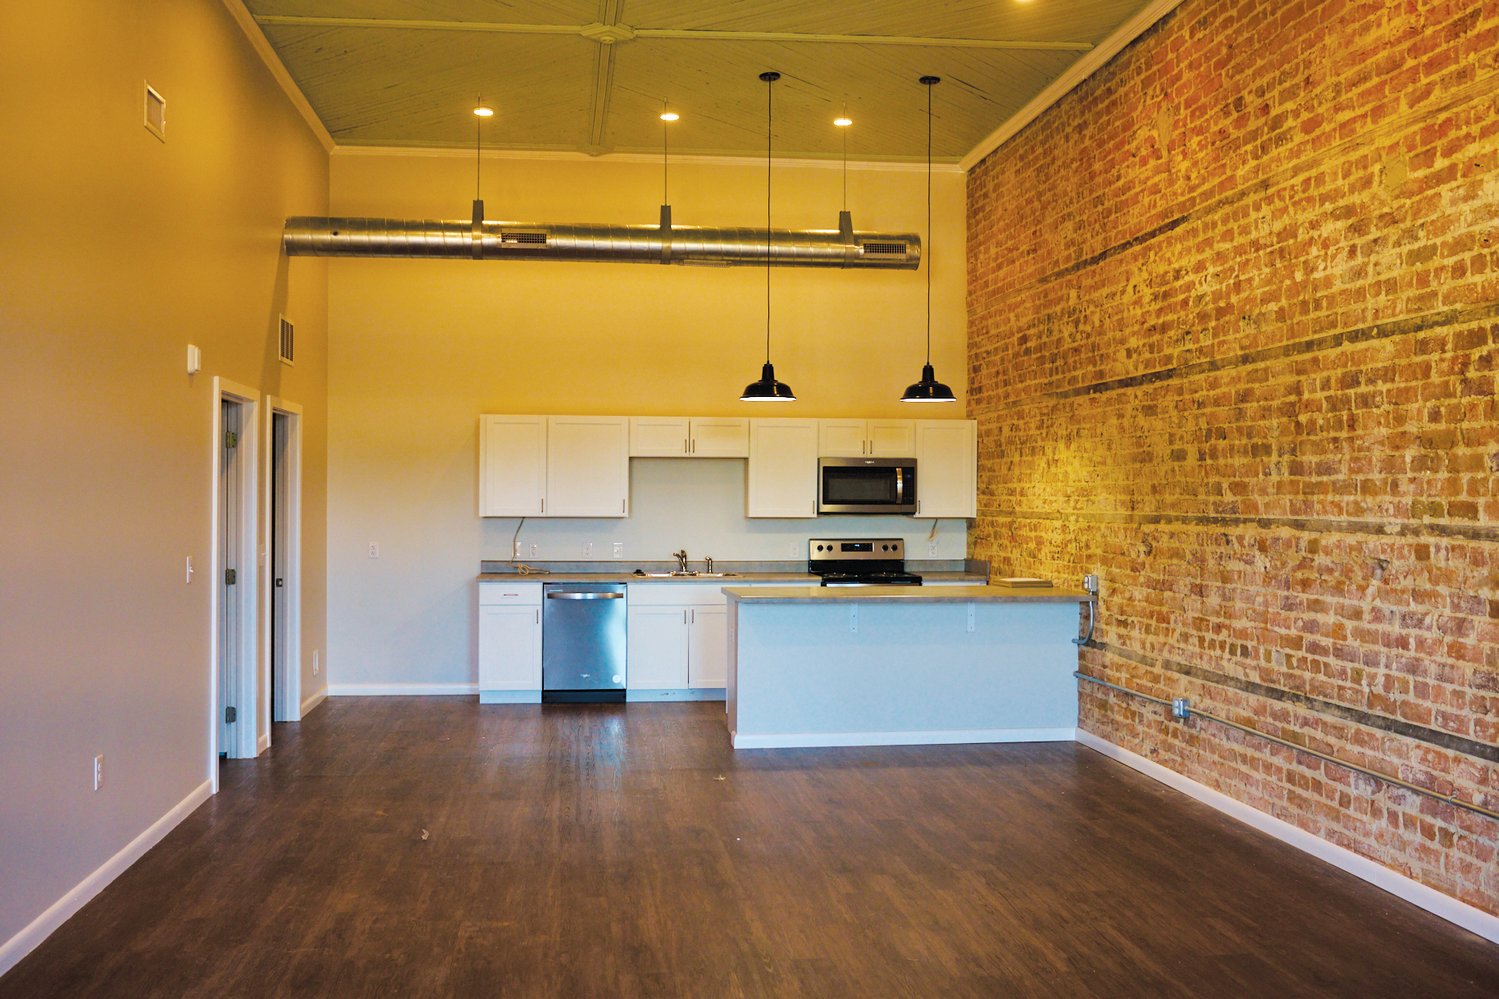 Farrar's renovations include space for 16 downtown apartments, which are nearly ready to welcome tenants.